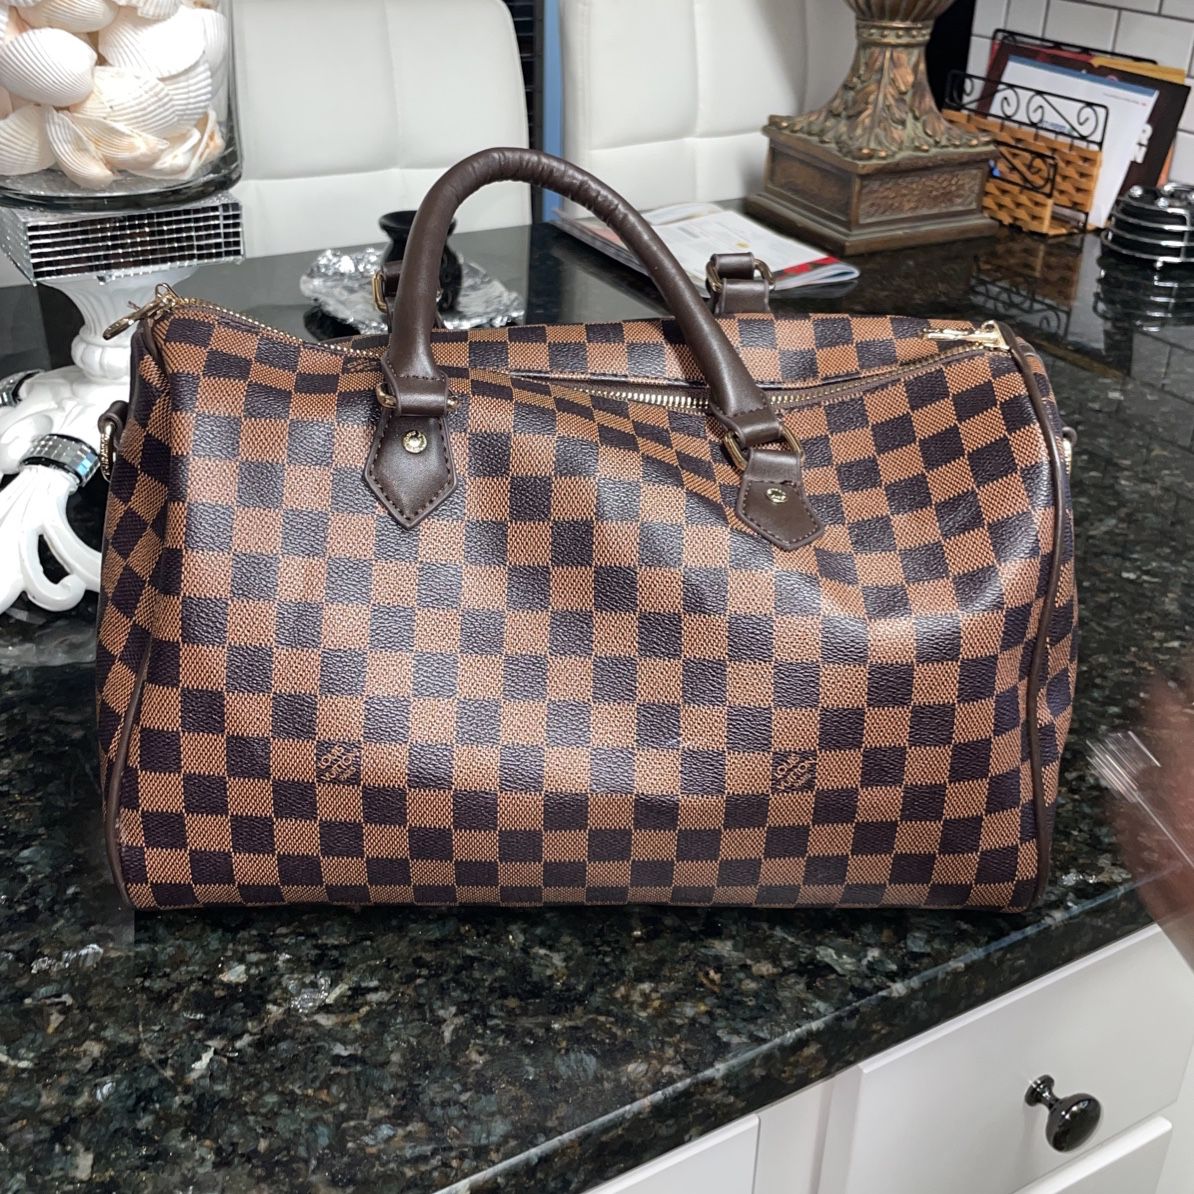 Lv Worn Needs Cleaning Inside And Strap Replacement At Lv Lost 150 To Take  Initials Off for Sale in Highland Mills, NY - OfferUp